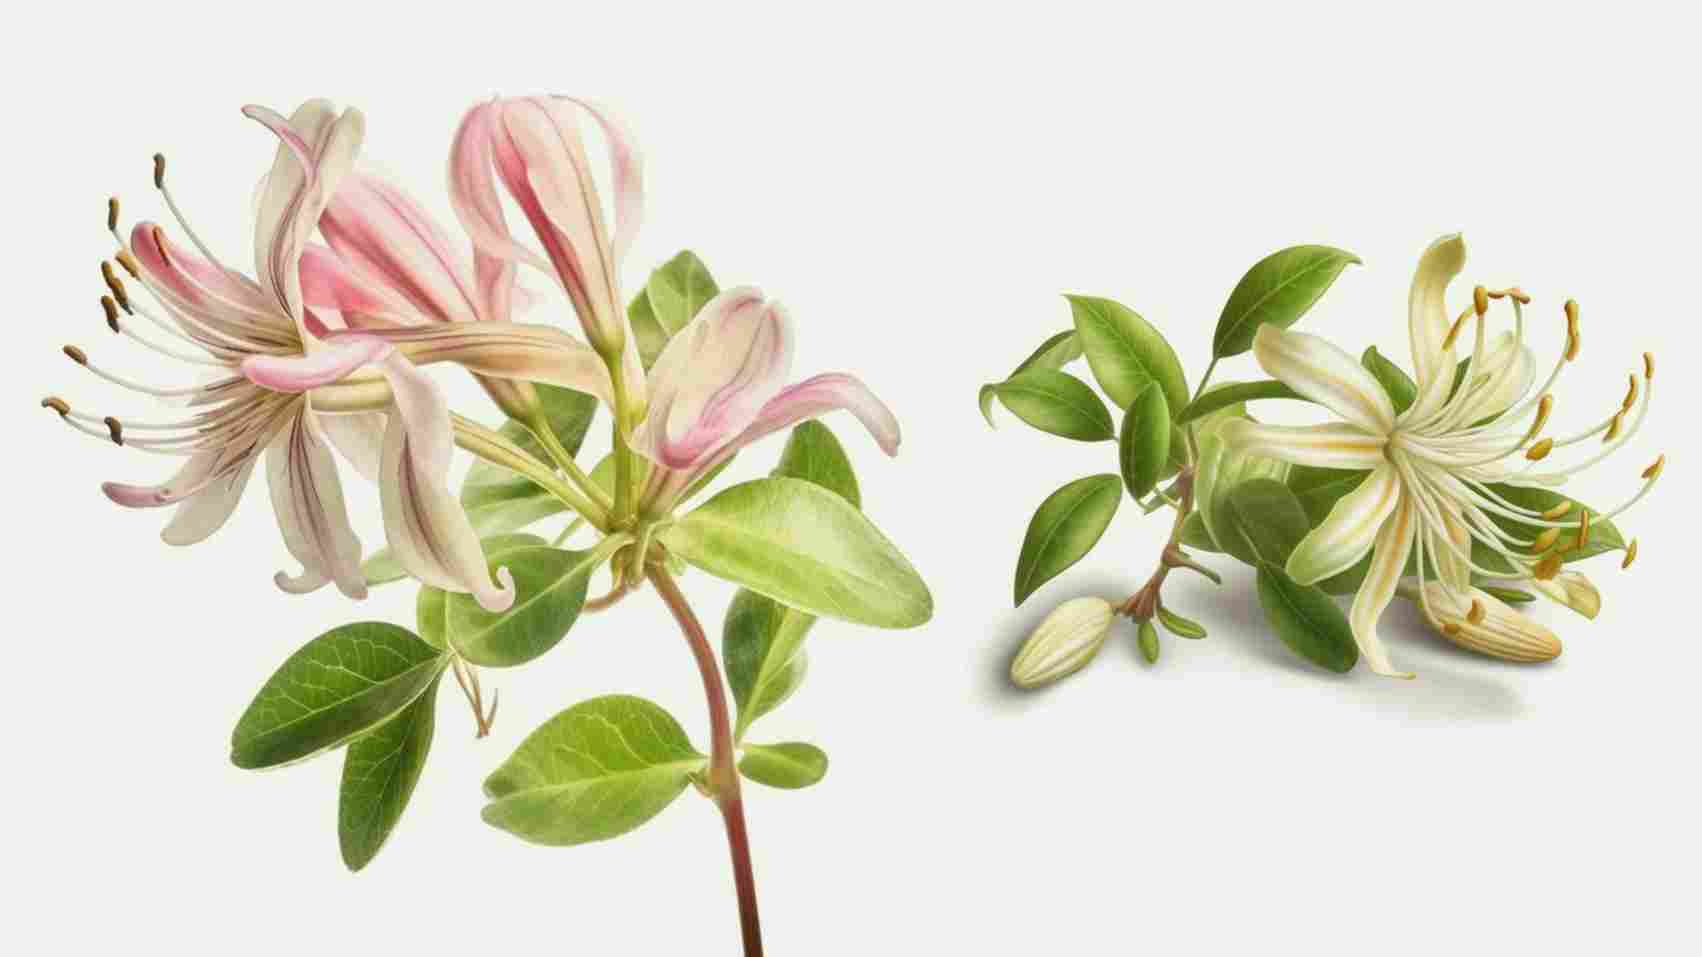 Spiritual Meaning of Smelling Honeysuckle